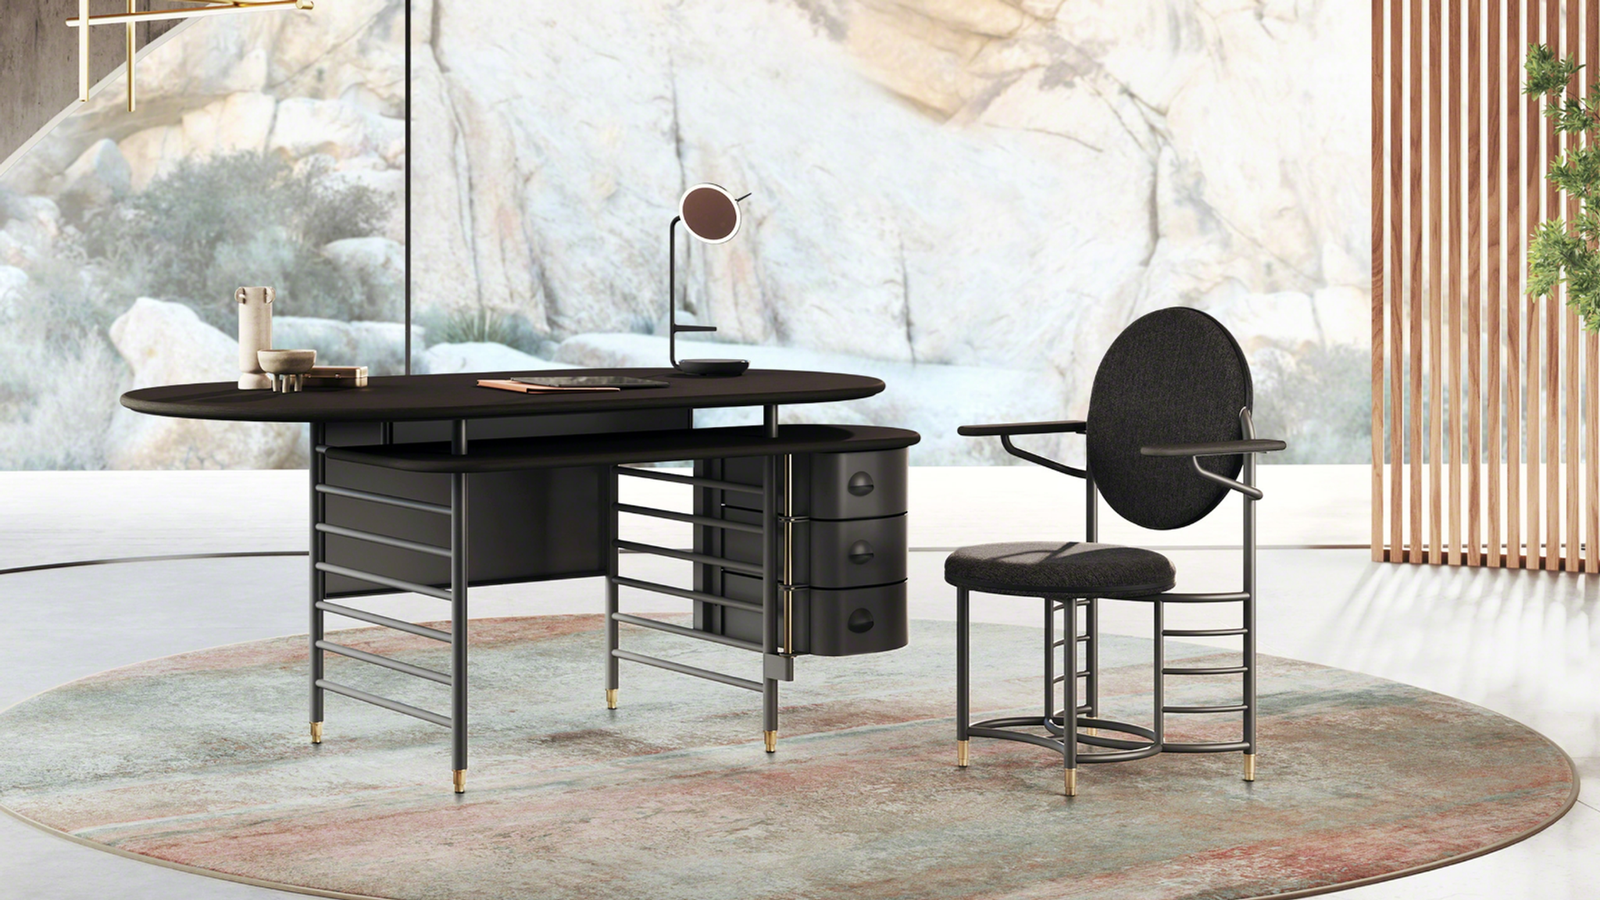 The Modern collection's Frank Lloyd Wright Racine Executive desk and Guest chair.